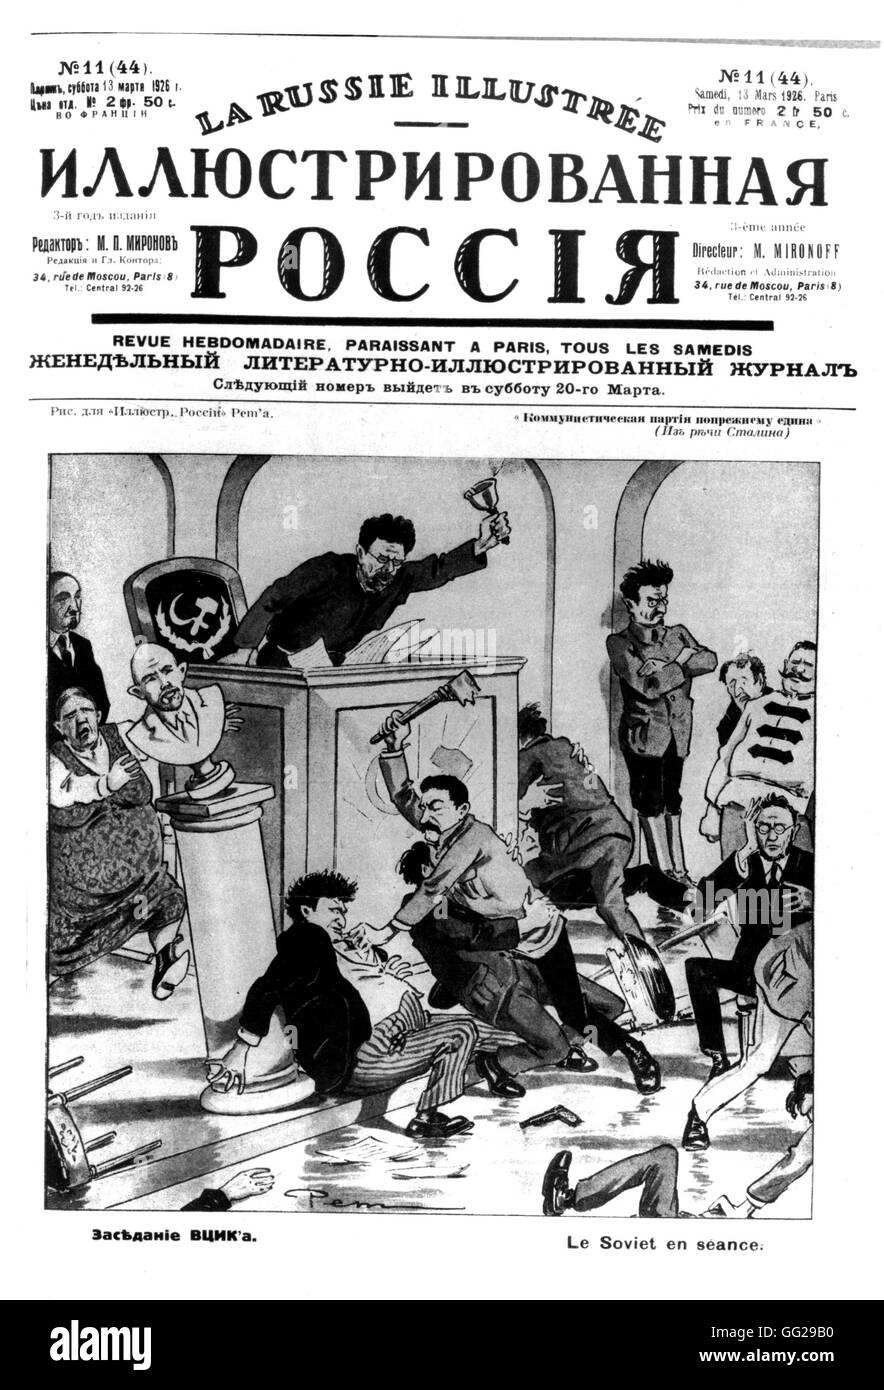 Satirical cartoon on a Soviet session. Trotsky, on the r., Kalinin in the gallery, Stalin beating up Kamenev. in "Russia illustrated", magazine published in Paris.  1926 U.S.S.R. Stock Photo